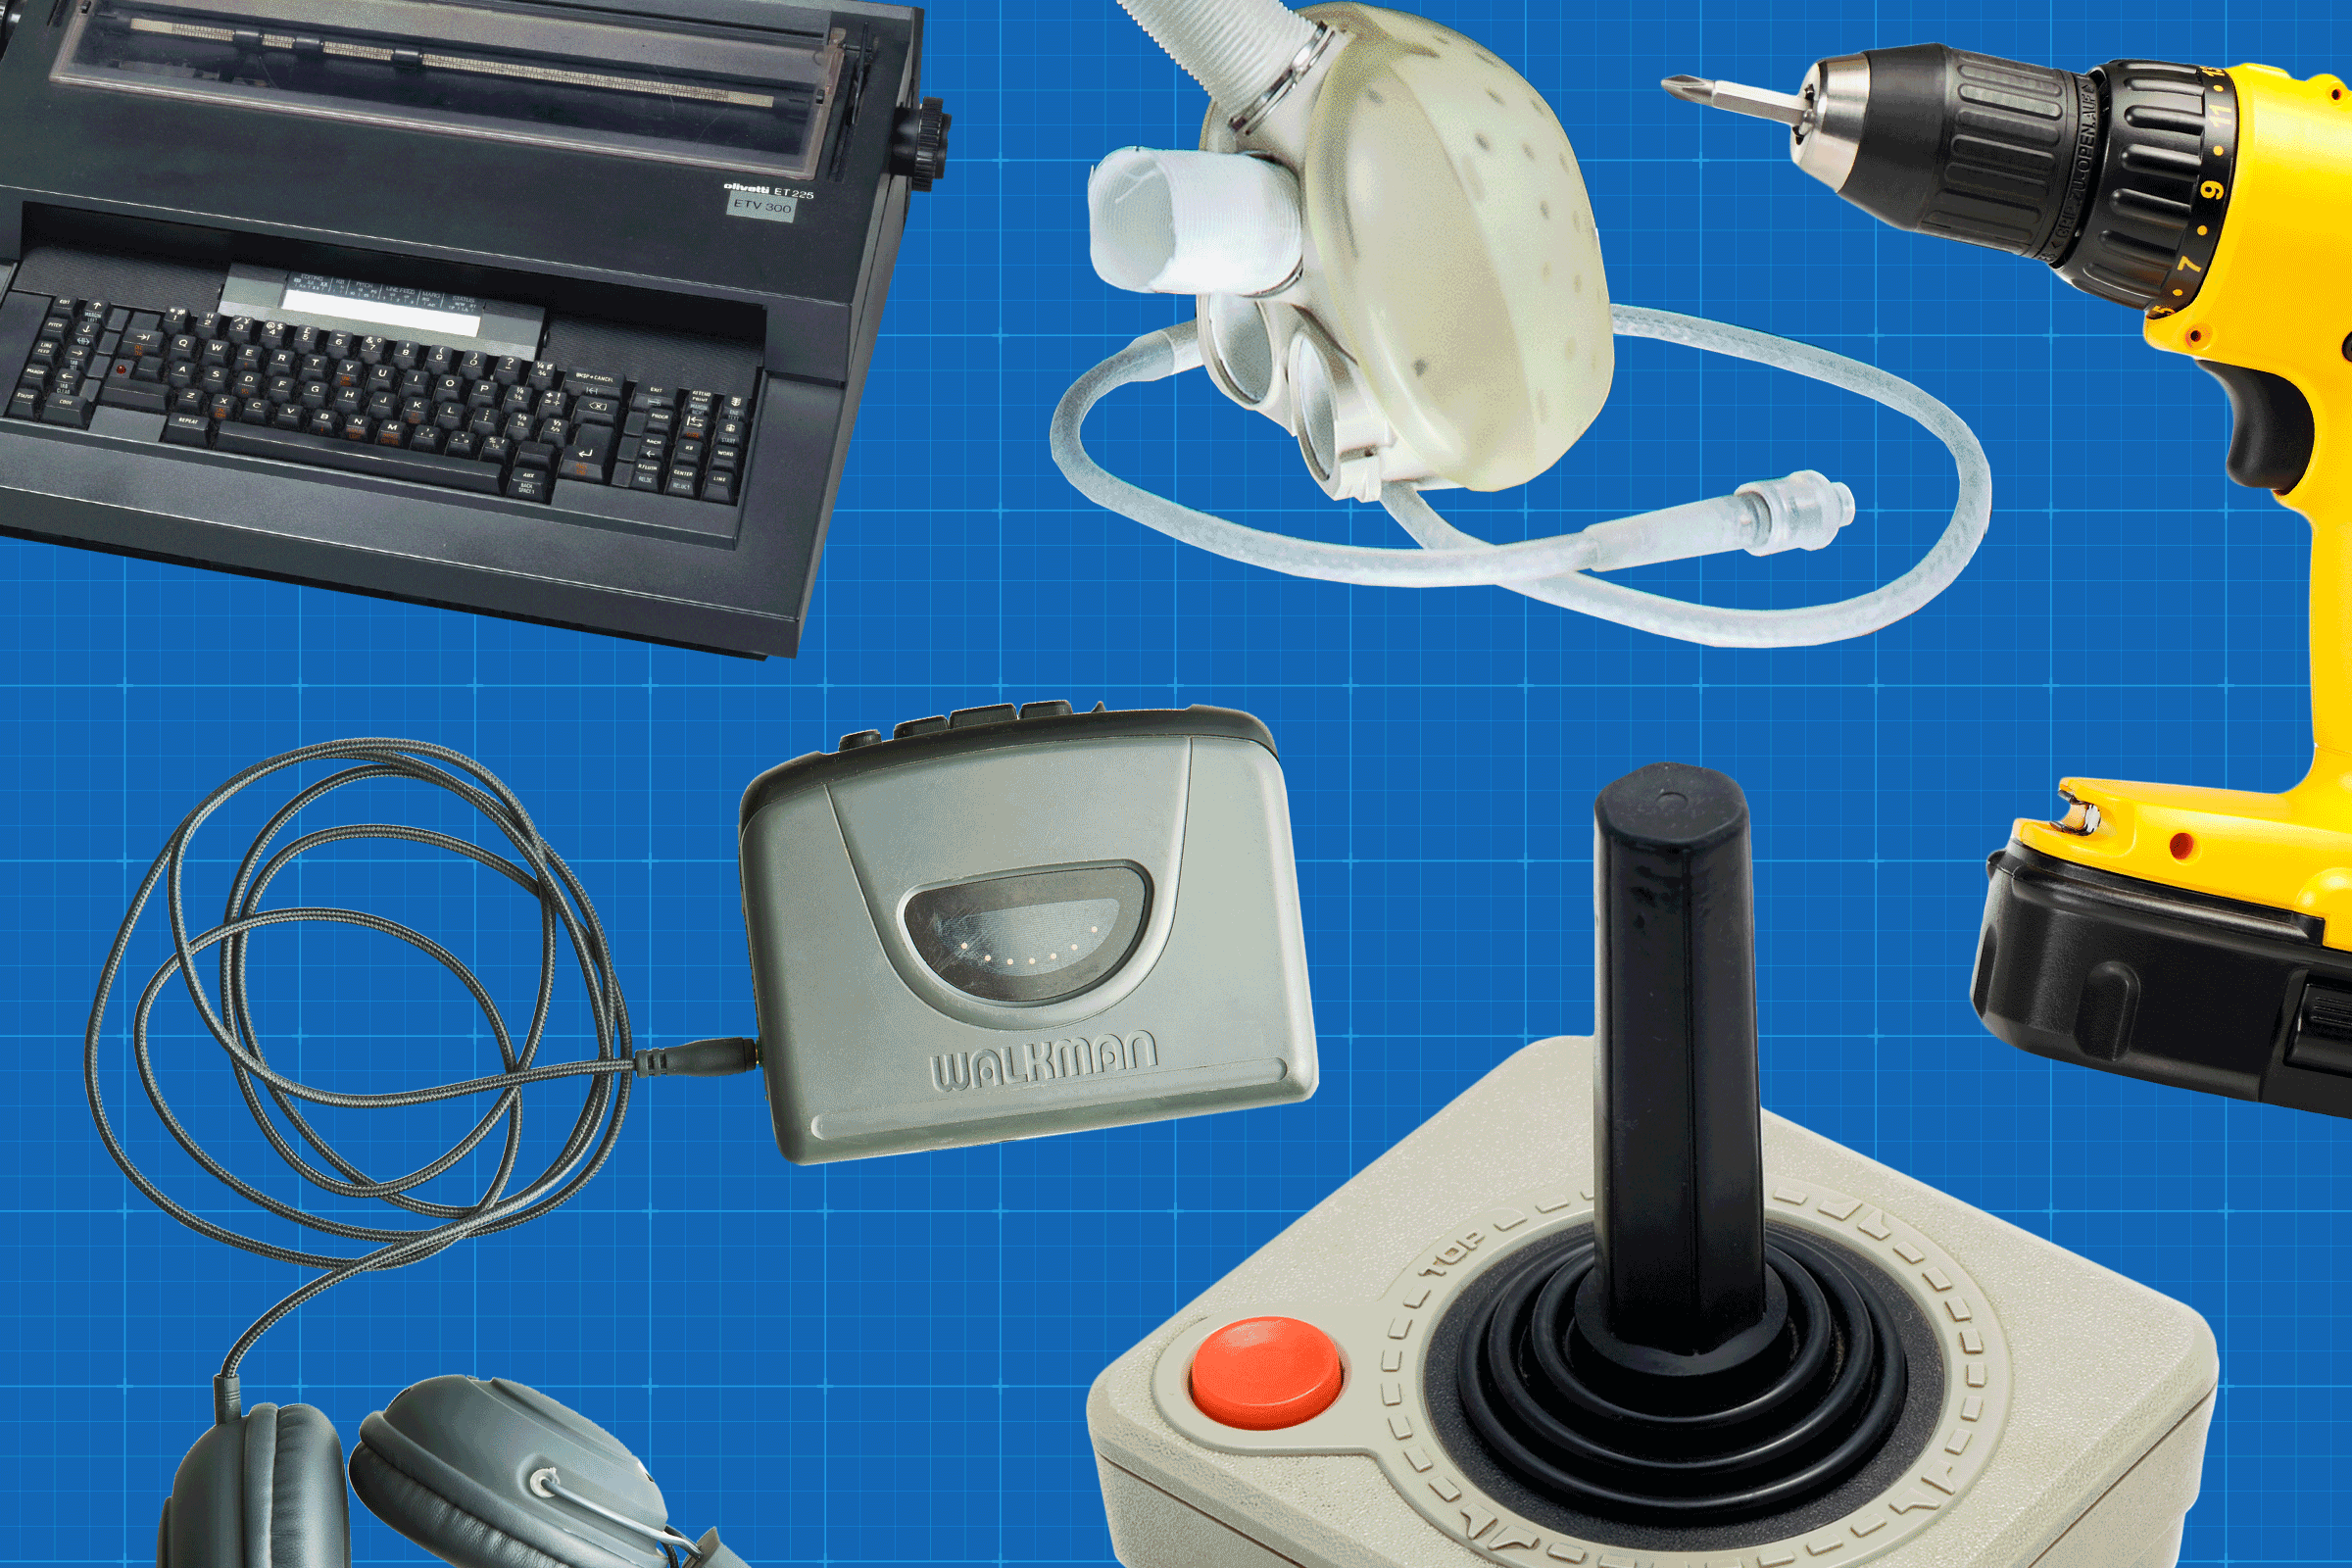 The Greatest Inventions In The Past 1000 Years